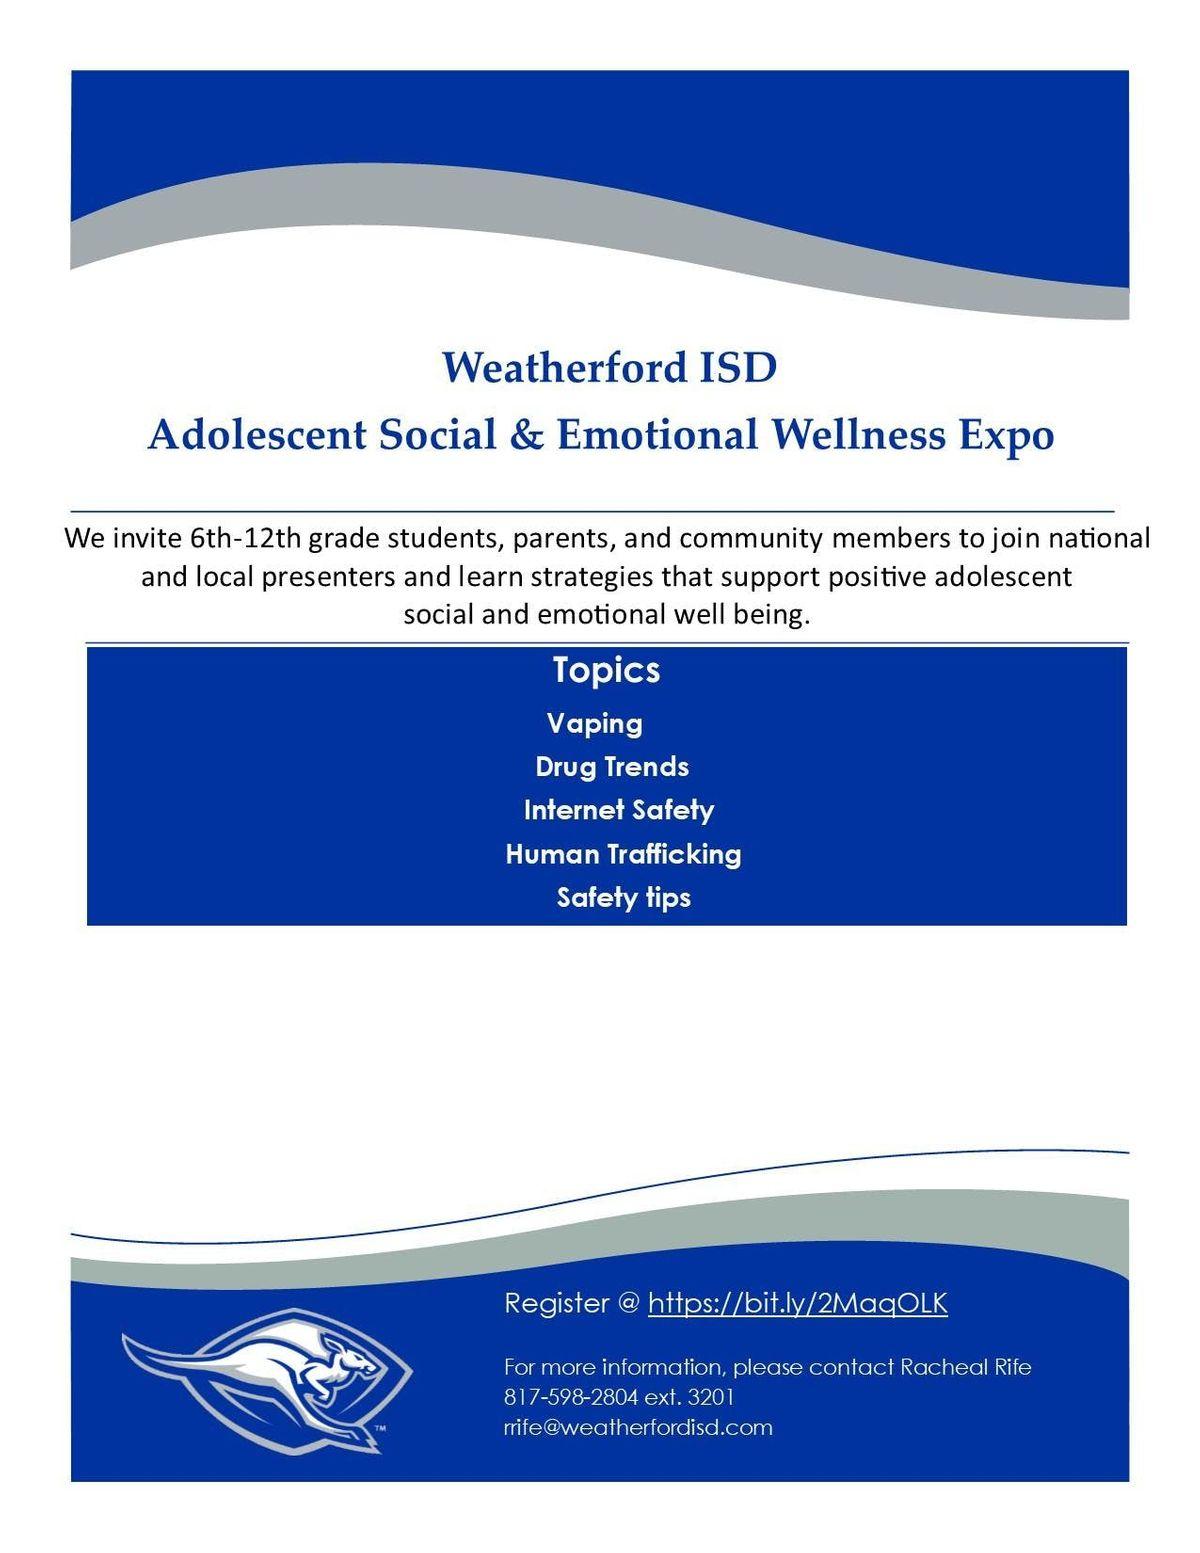 Weatherford ISD Logo - Weatherford ISD Adolescent Social & Emotional Wellness Expo at WHS ...